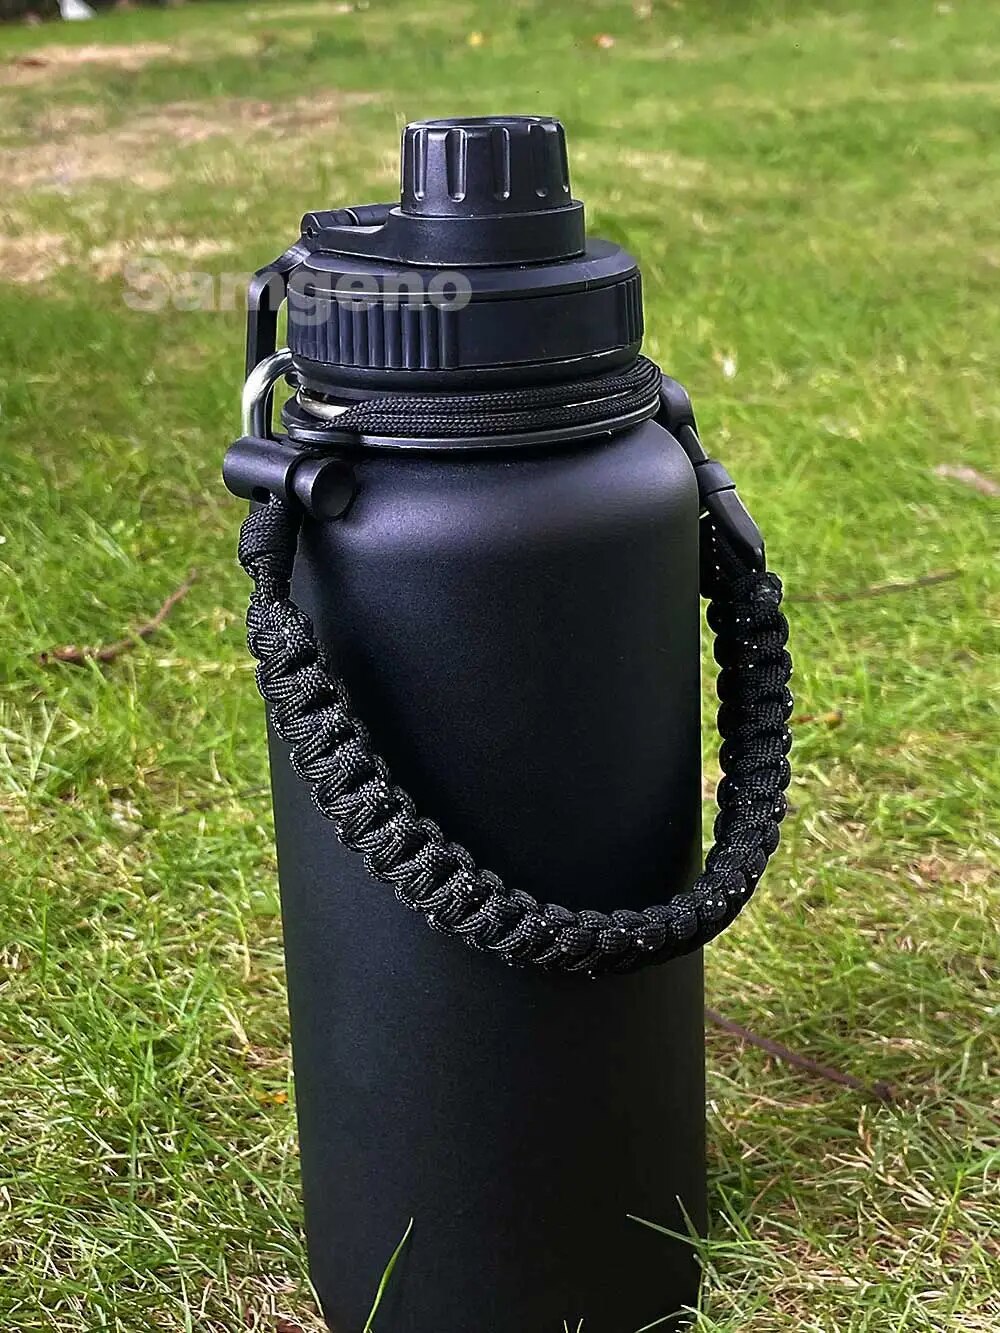 Image for 32 oz or 1000 ML stainless steel water bottle in black color, with double wall vacuum insulation. The bottle has dual lid with built-in carrying handle. The image shows the bottle is lying on the grass and has a black carry strap attached to bottle's neck below the lid.